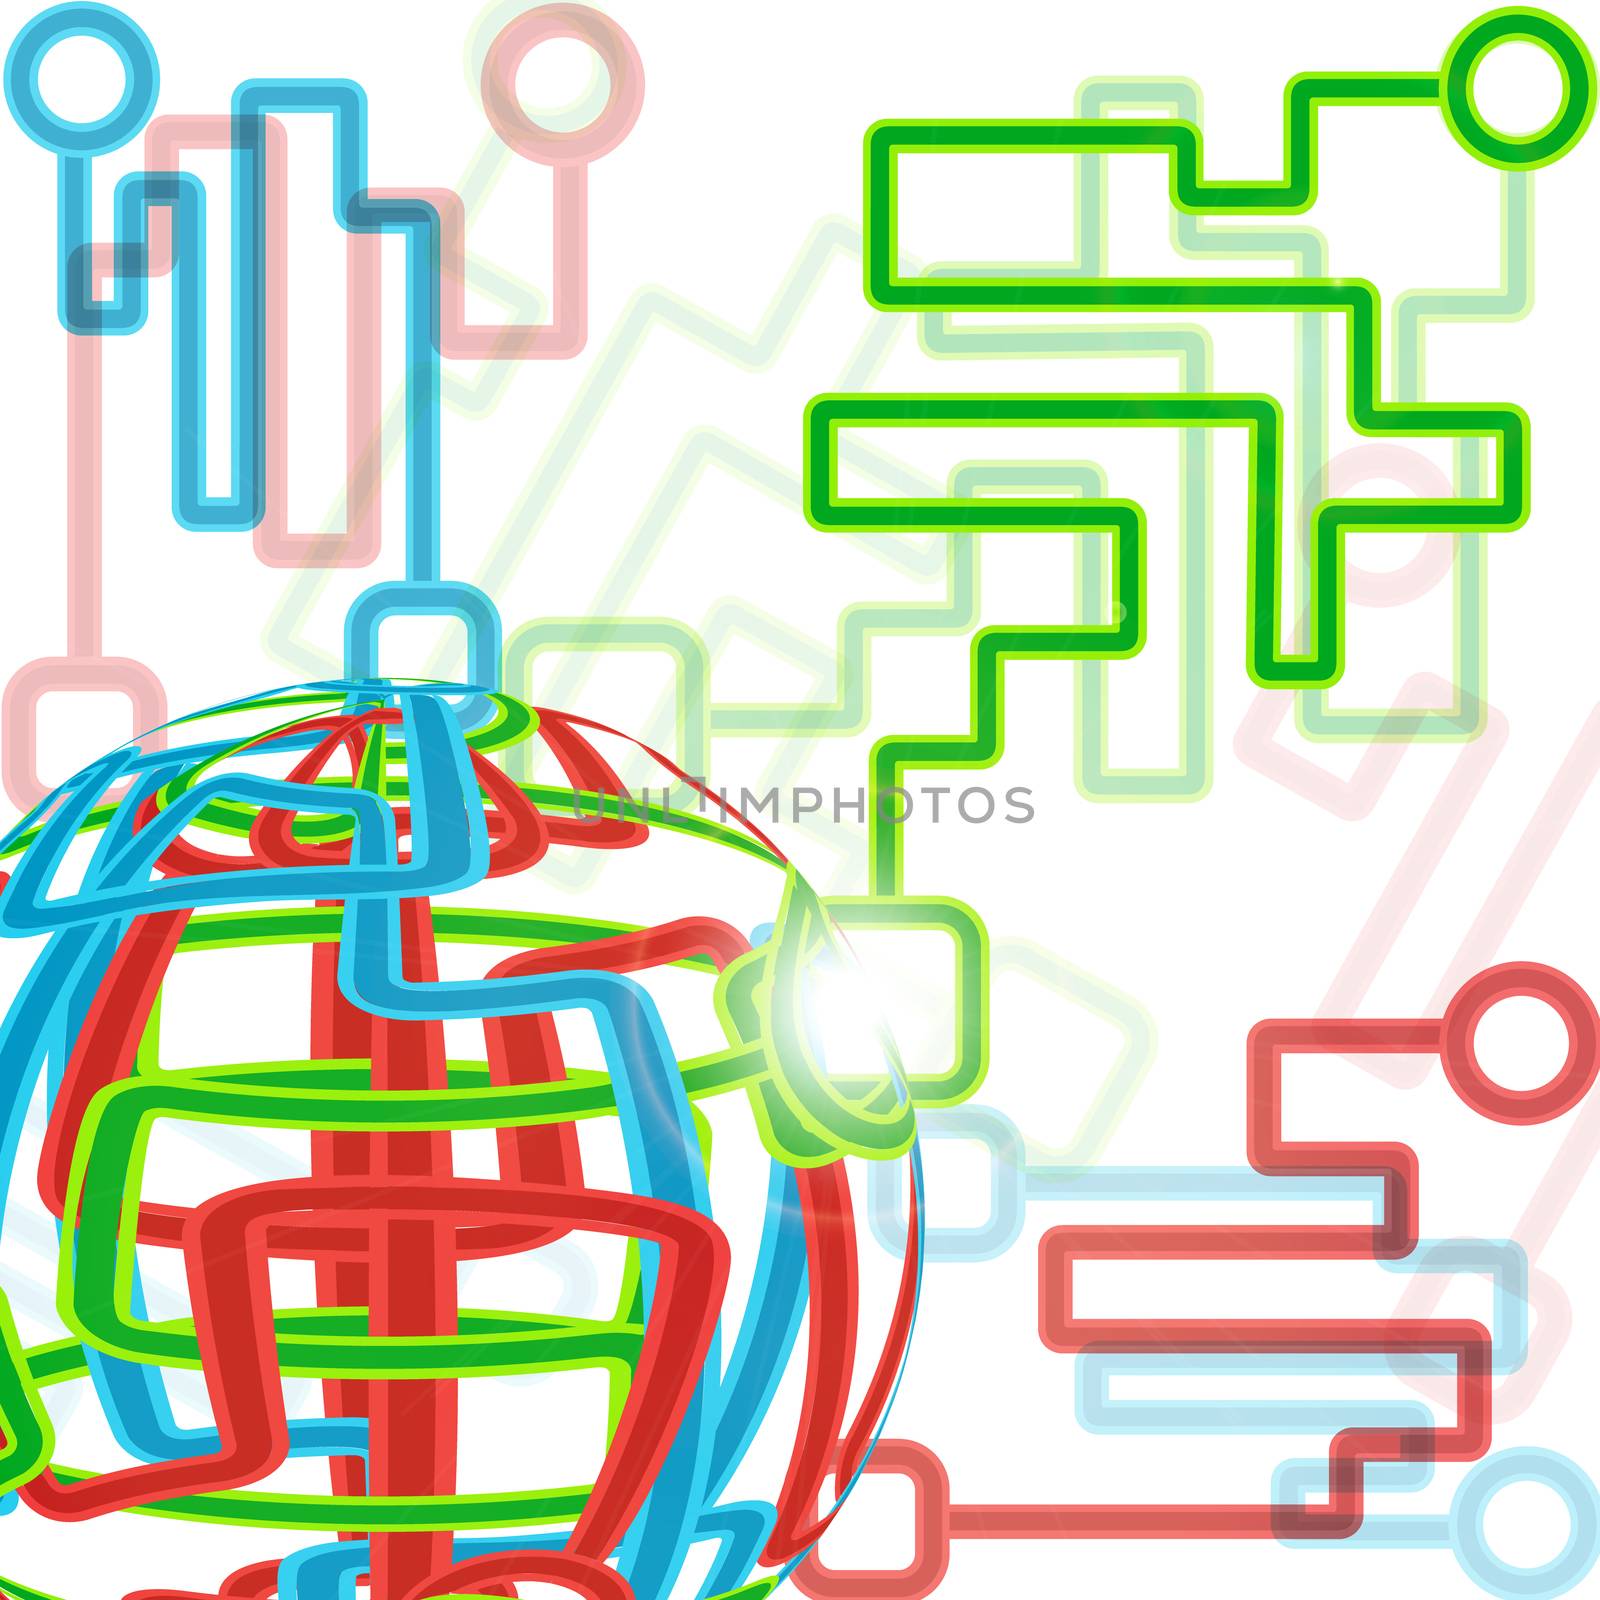 Network and internet illustarion, background with channels. Vector